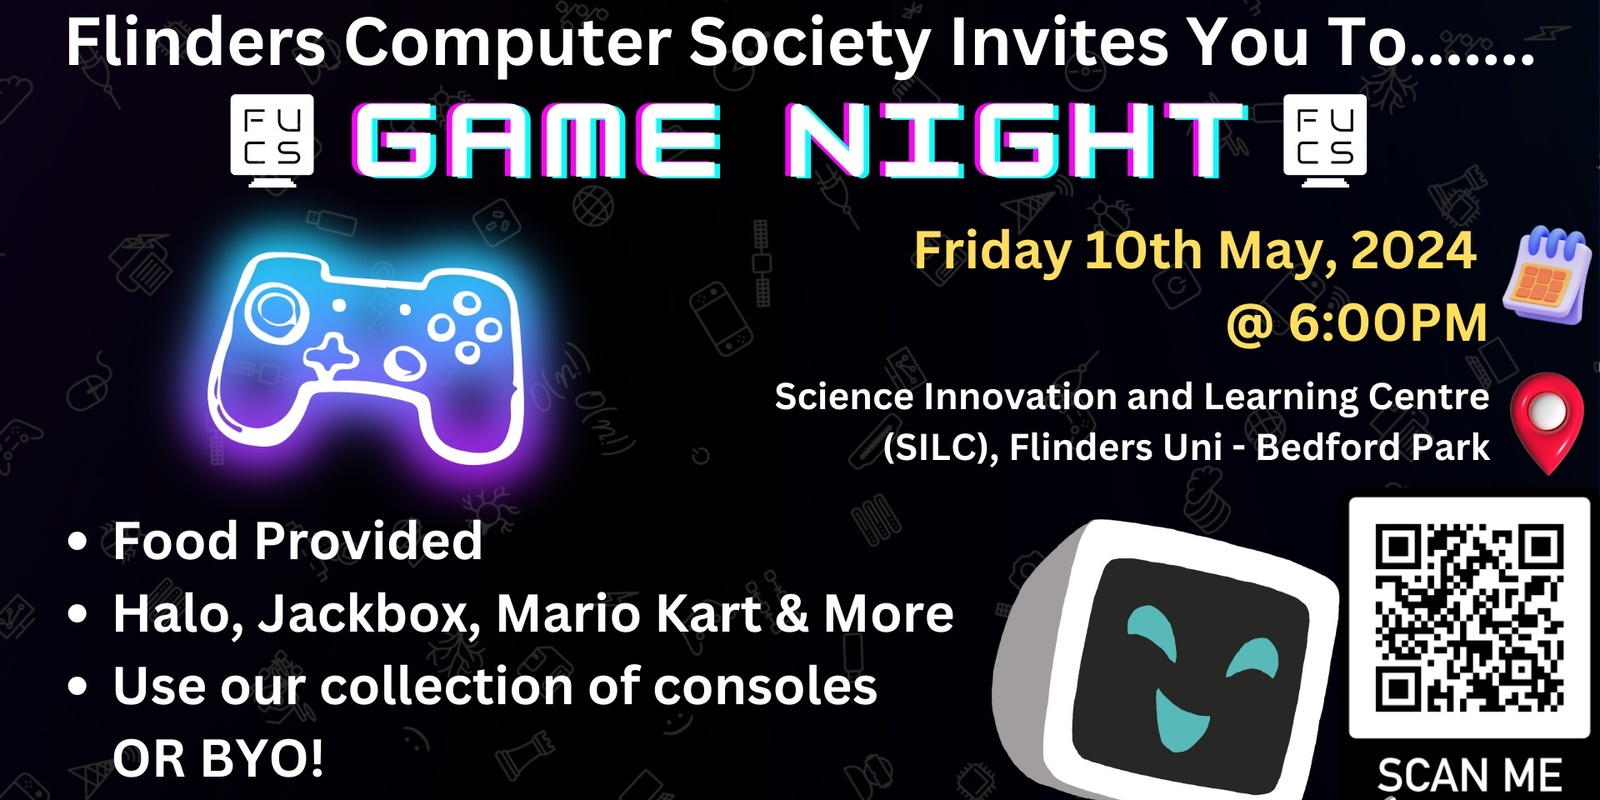 Banner image for FUCS Gaming Night